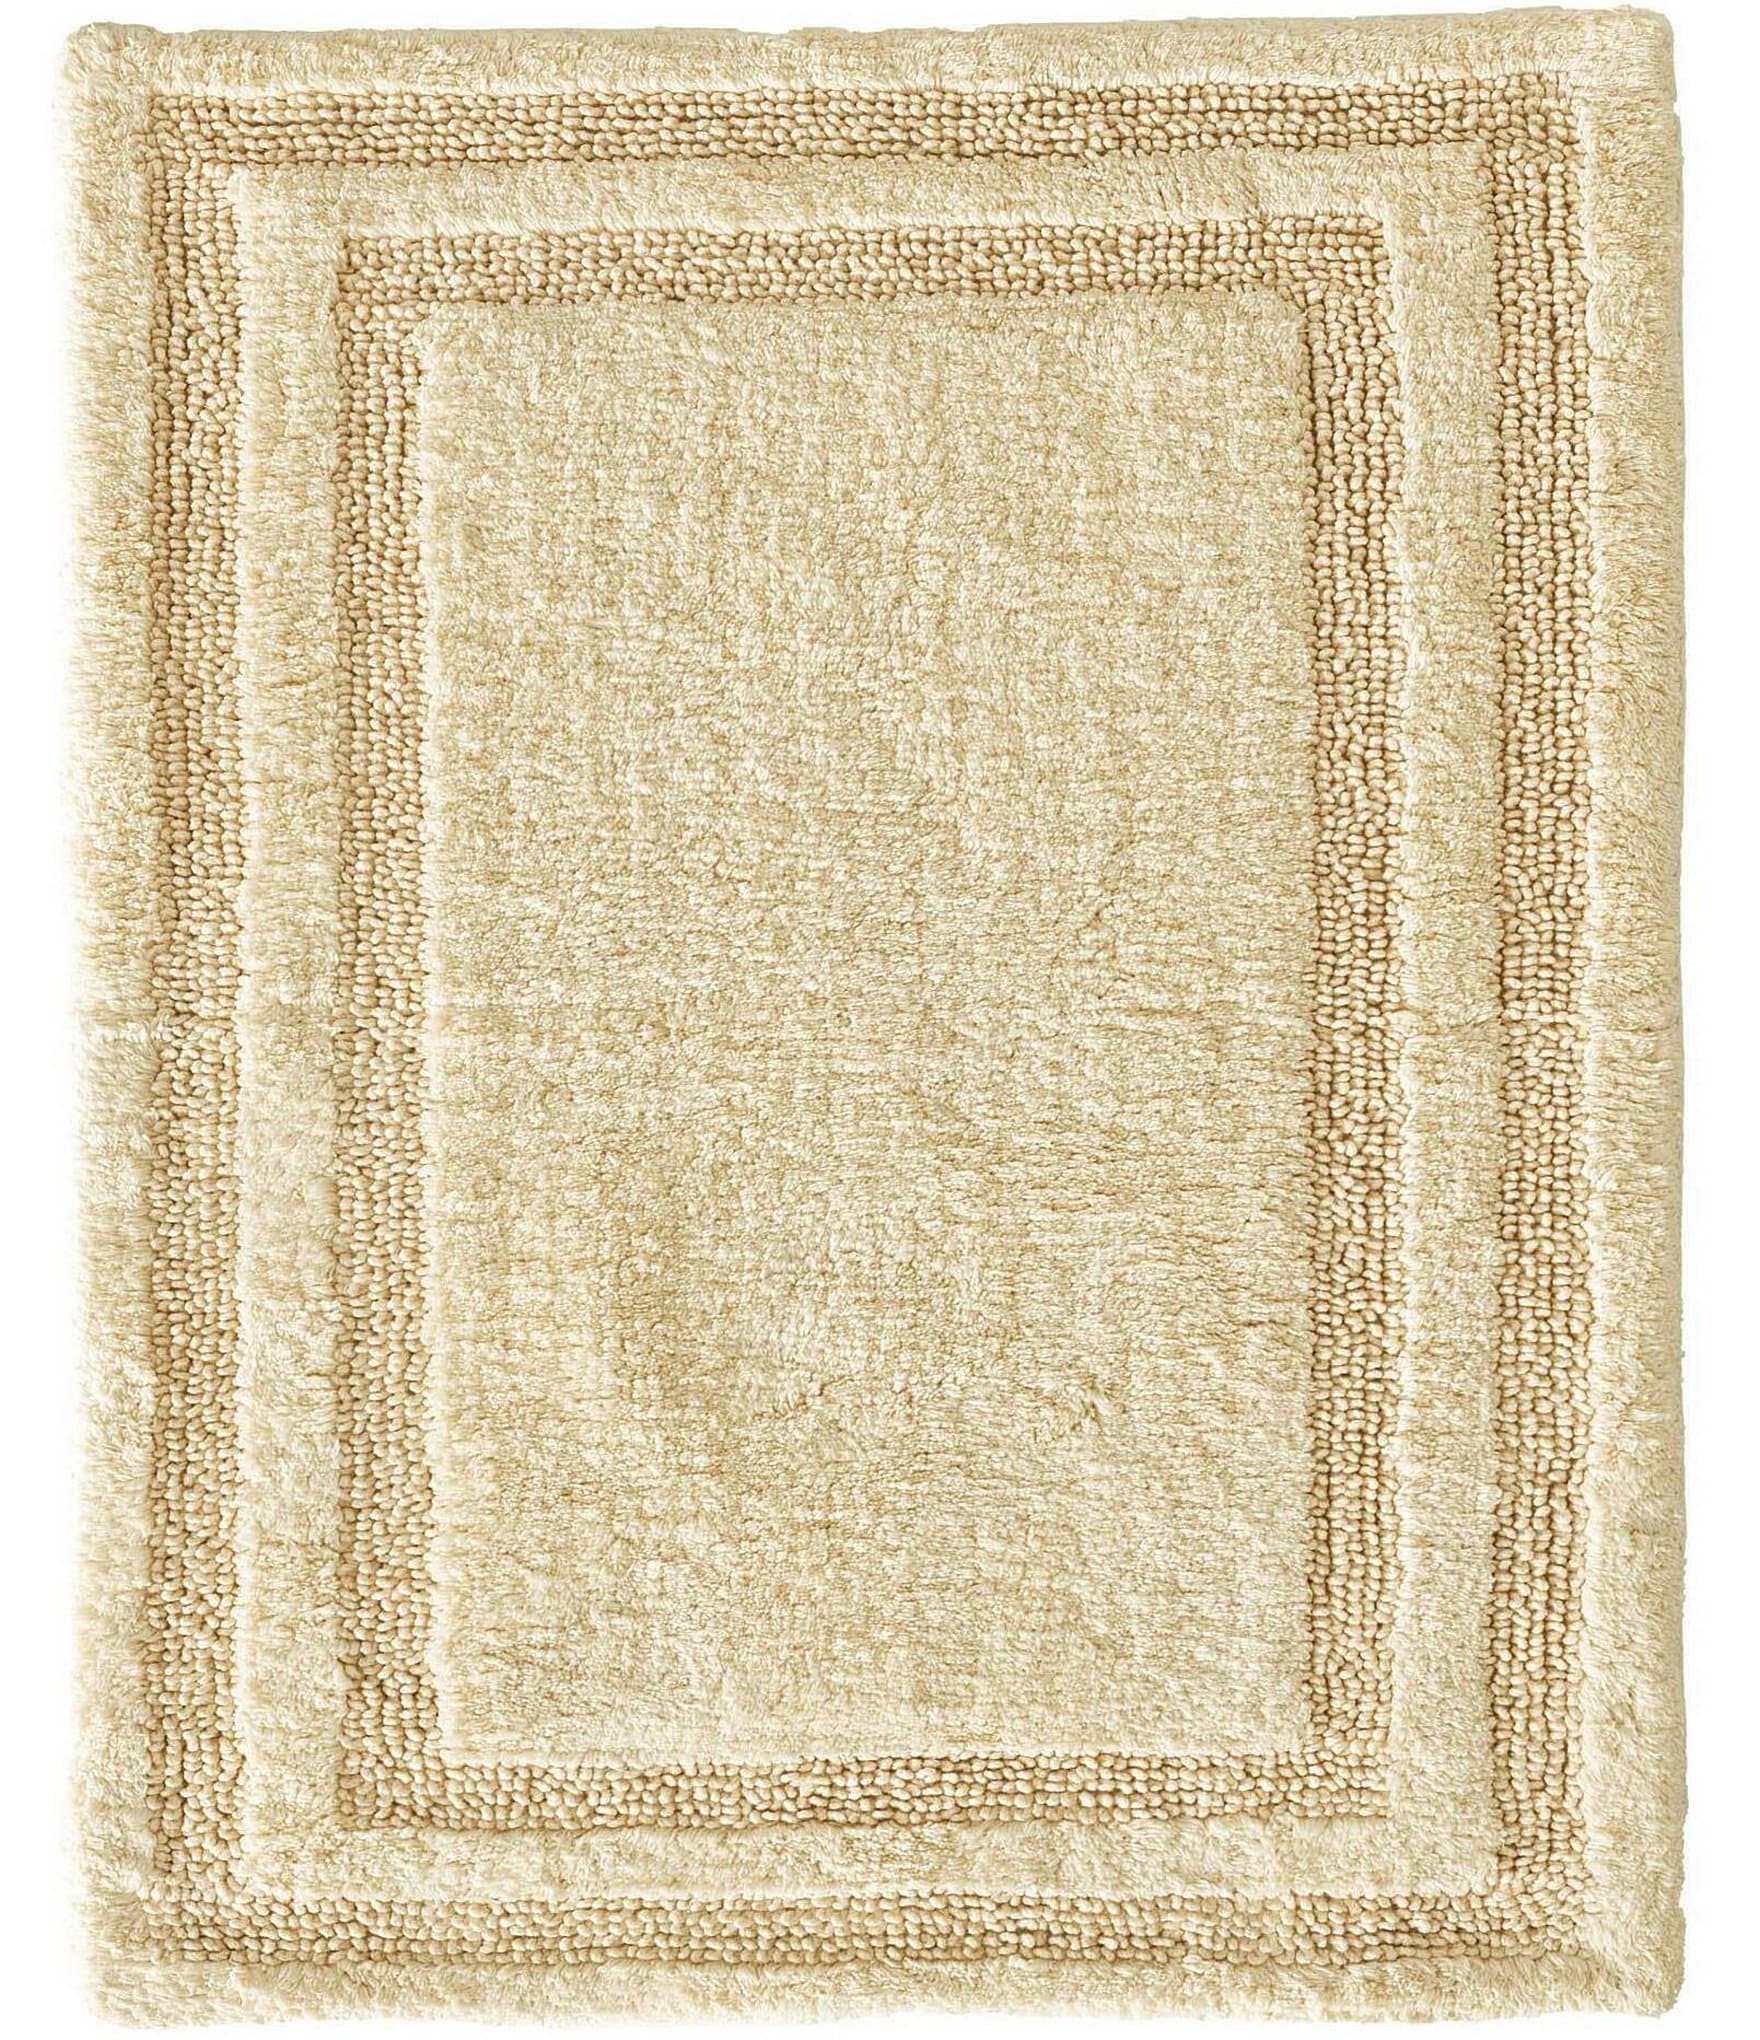 Town & Country Living Beige Padded Bath Mat 2 Pack